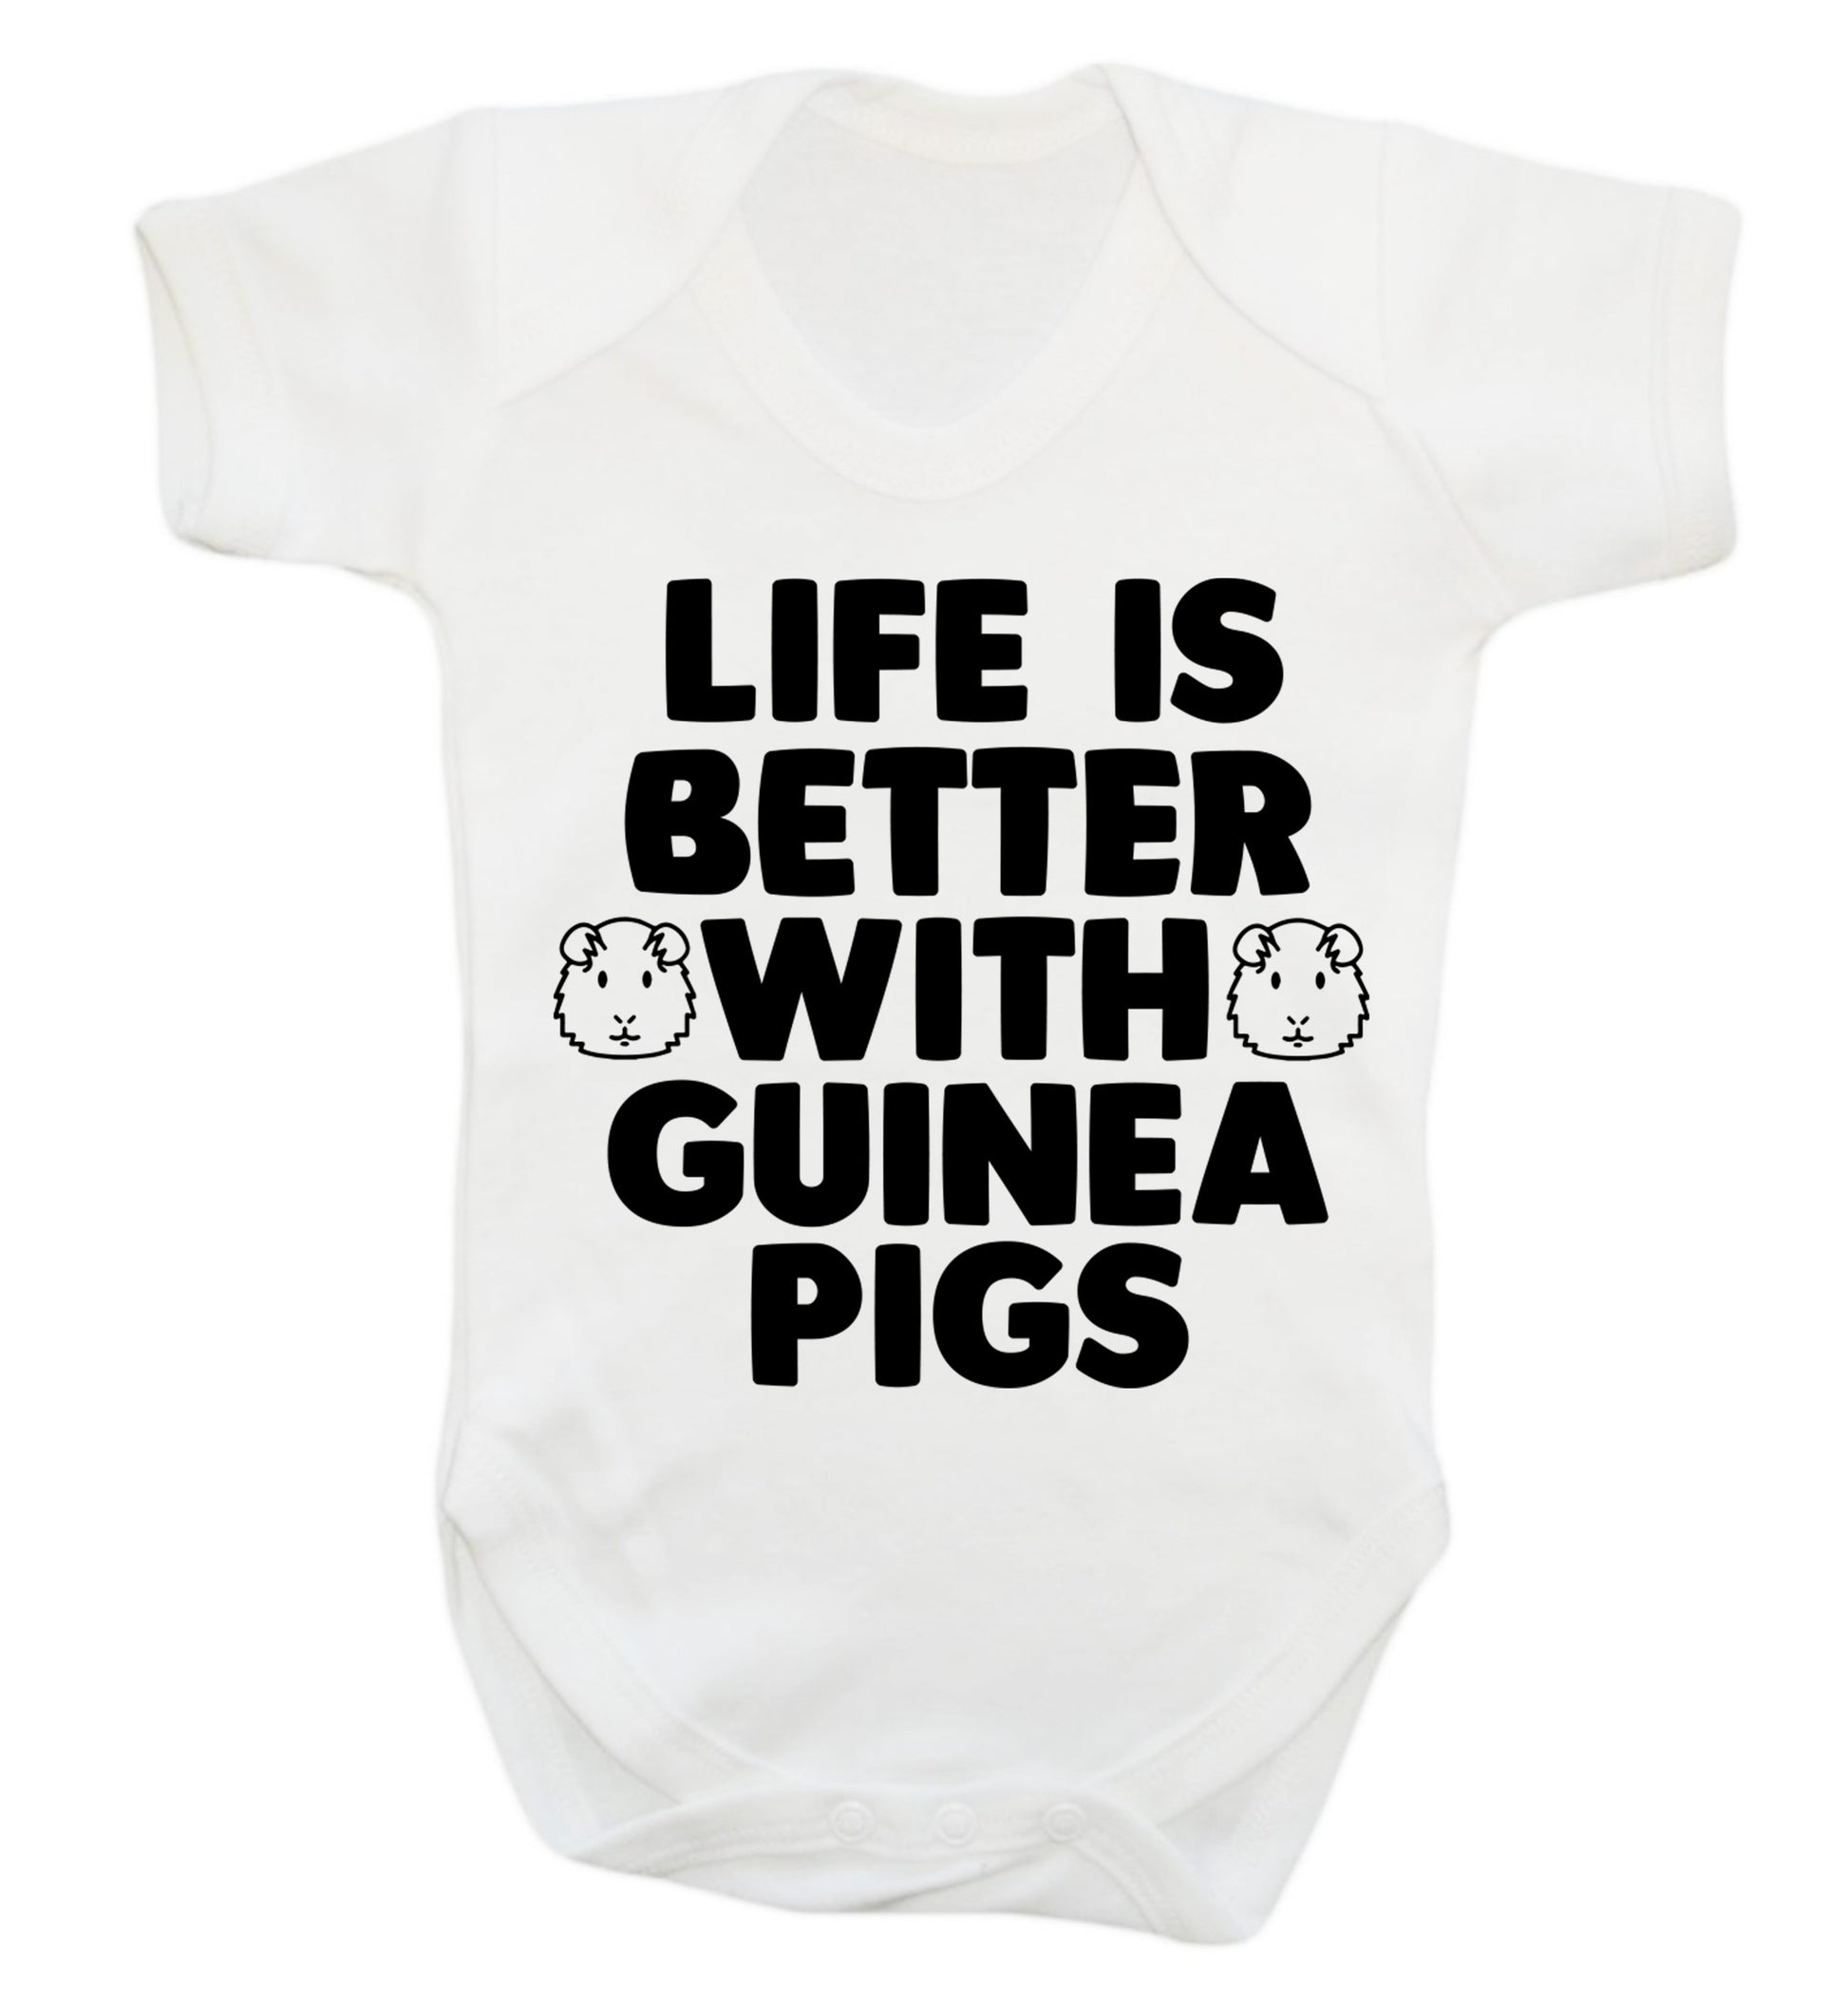 Life is better with guinea pigs Baby Vest white 18-24 months